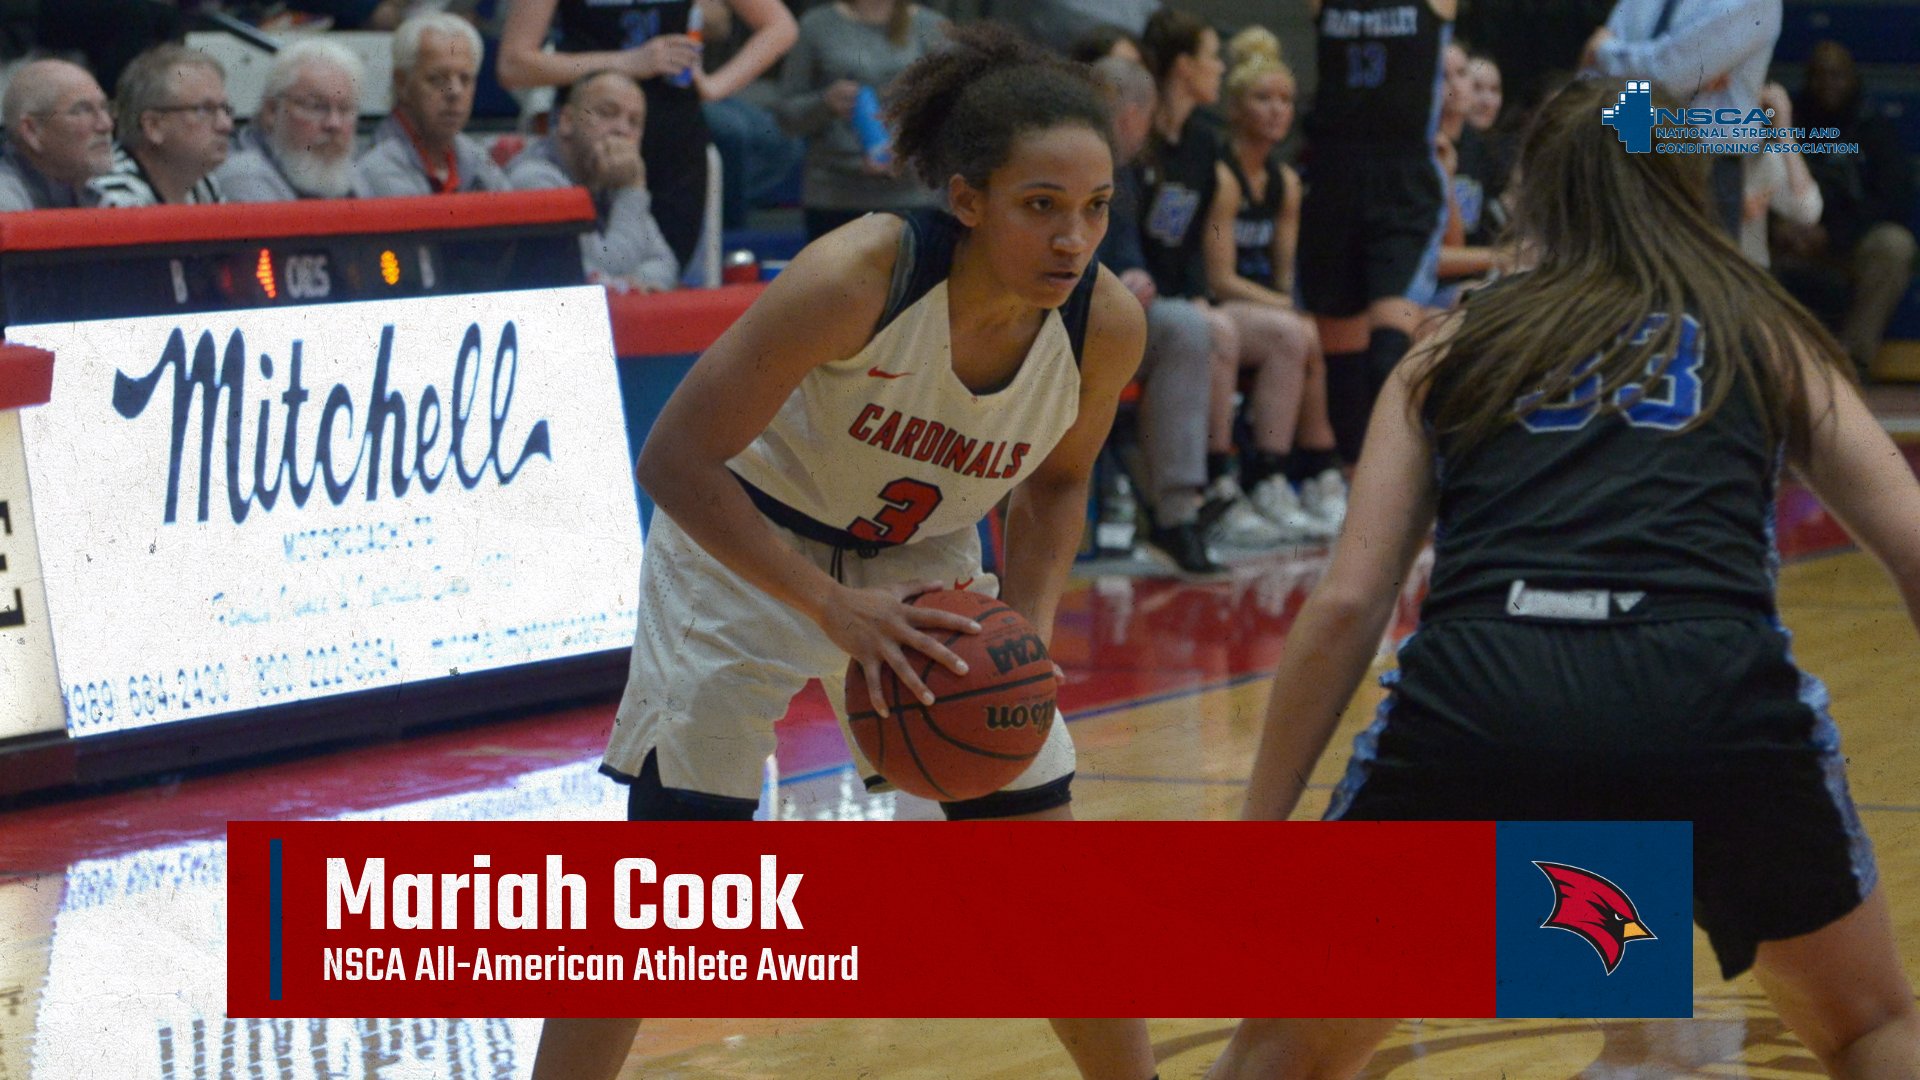 Mariah Cook Receives the NSCA 2020 All-American Athlete Award